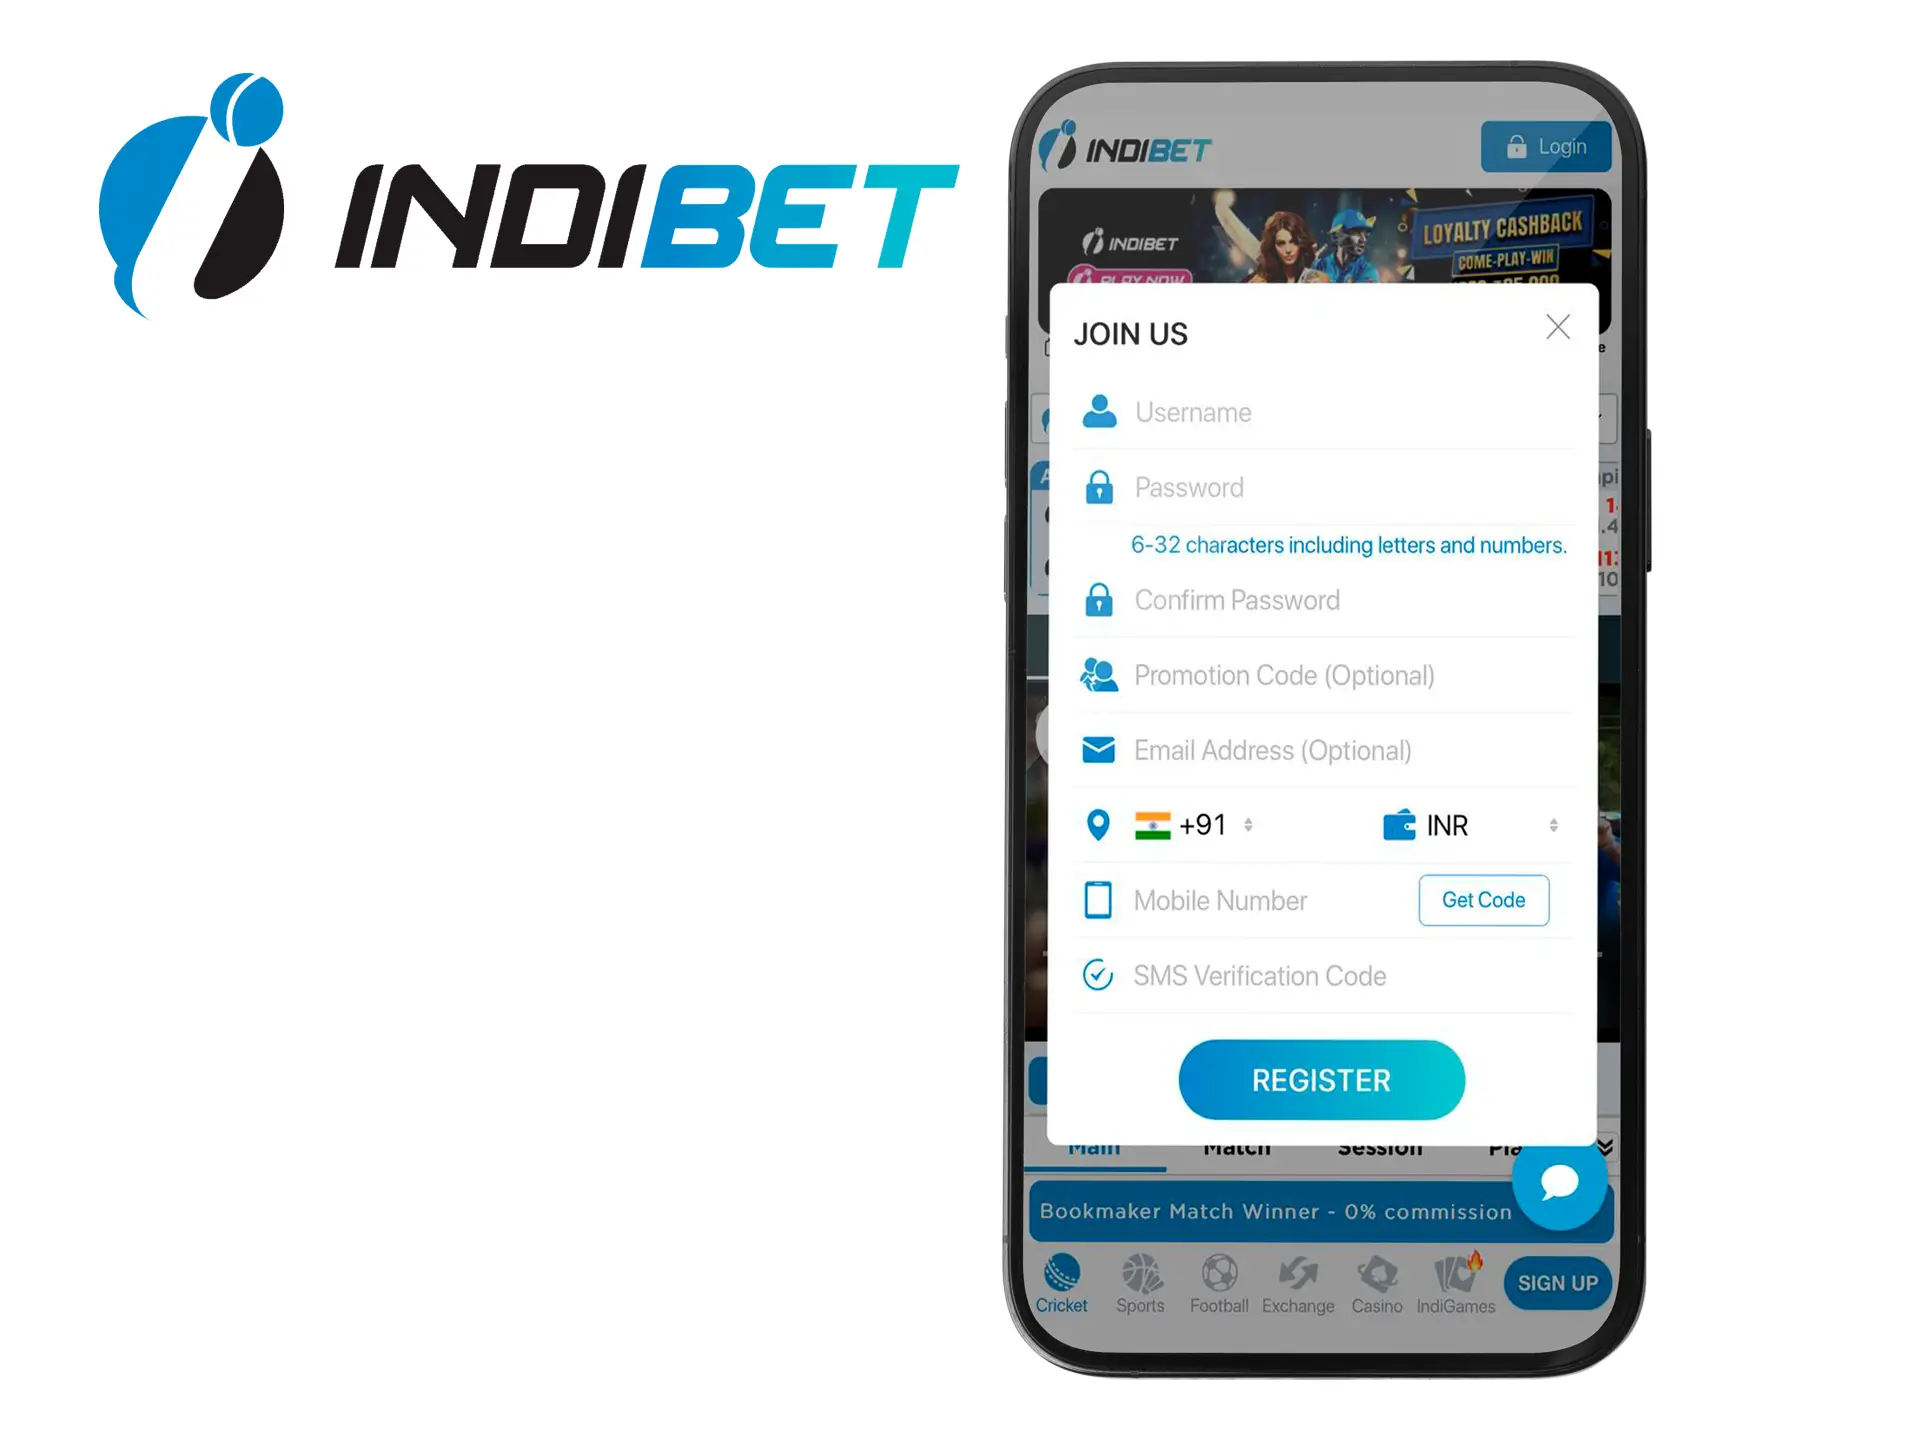 Carefully fill out the form to register at Indibet Casino.